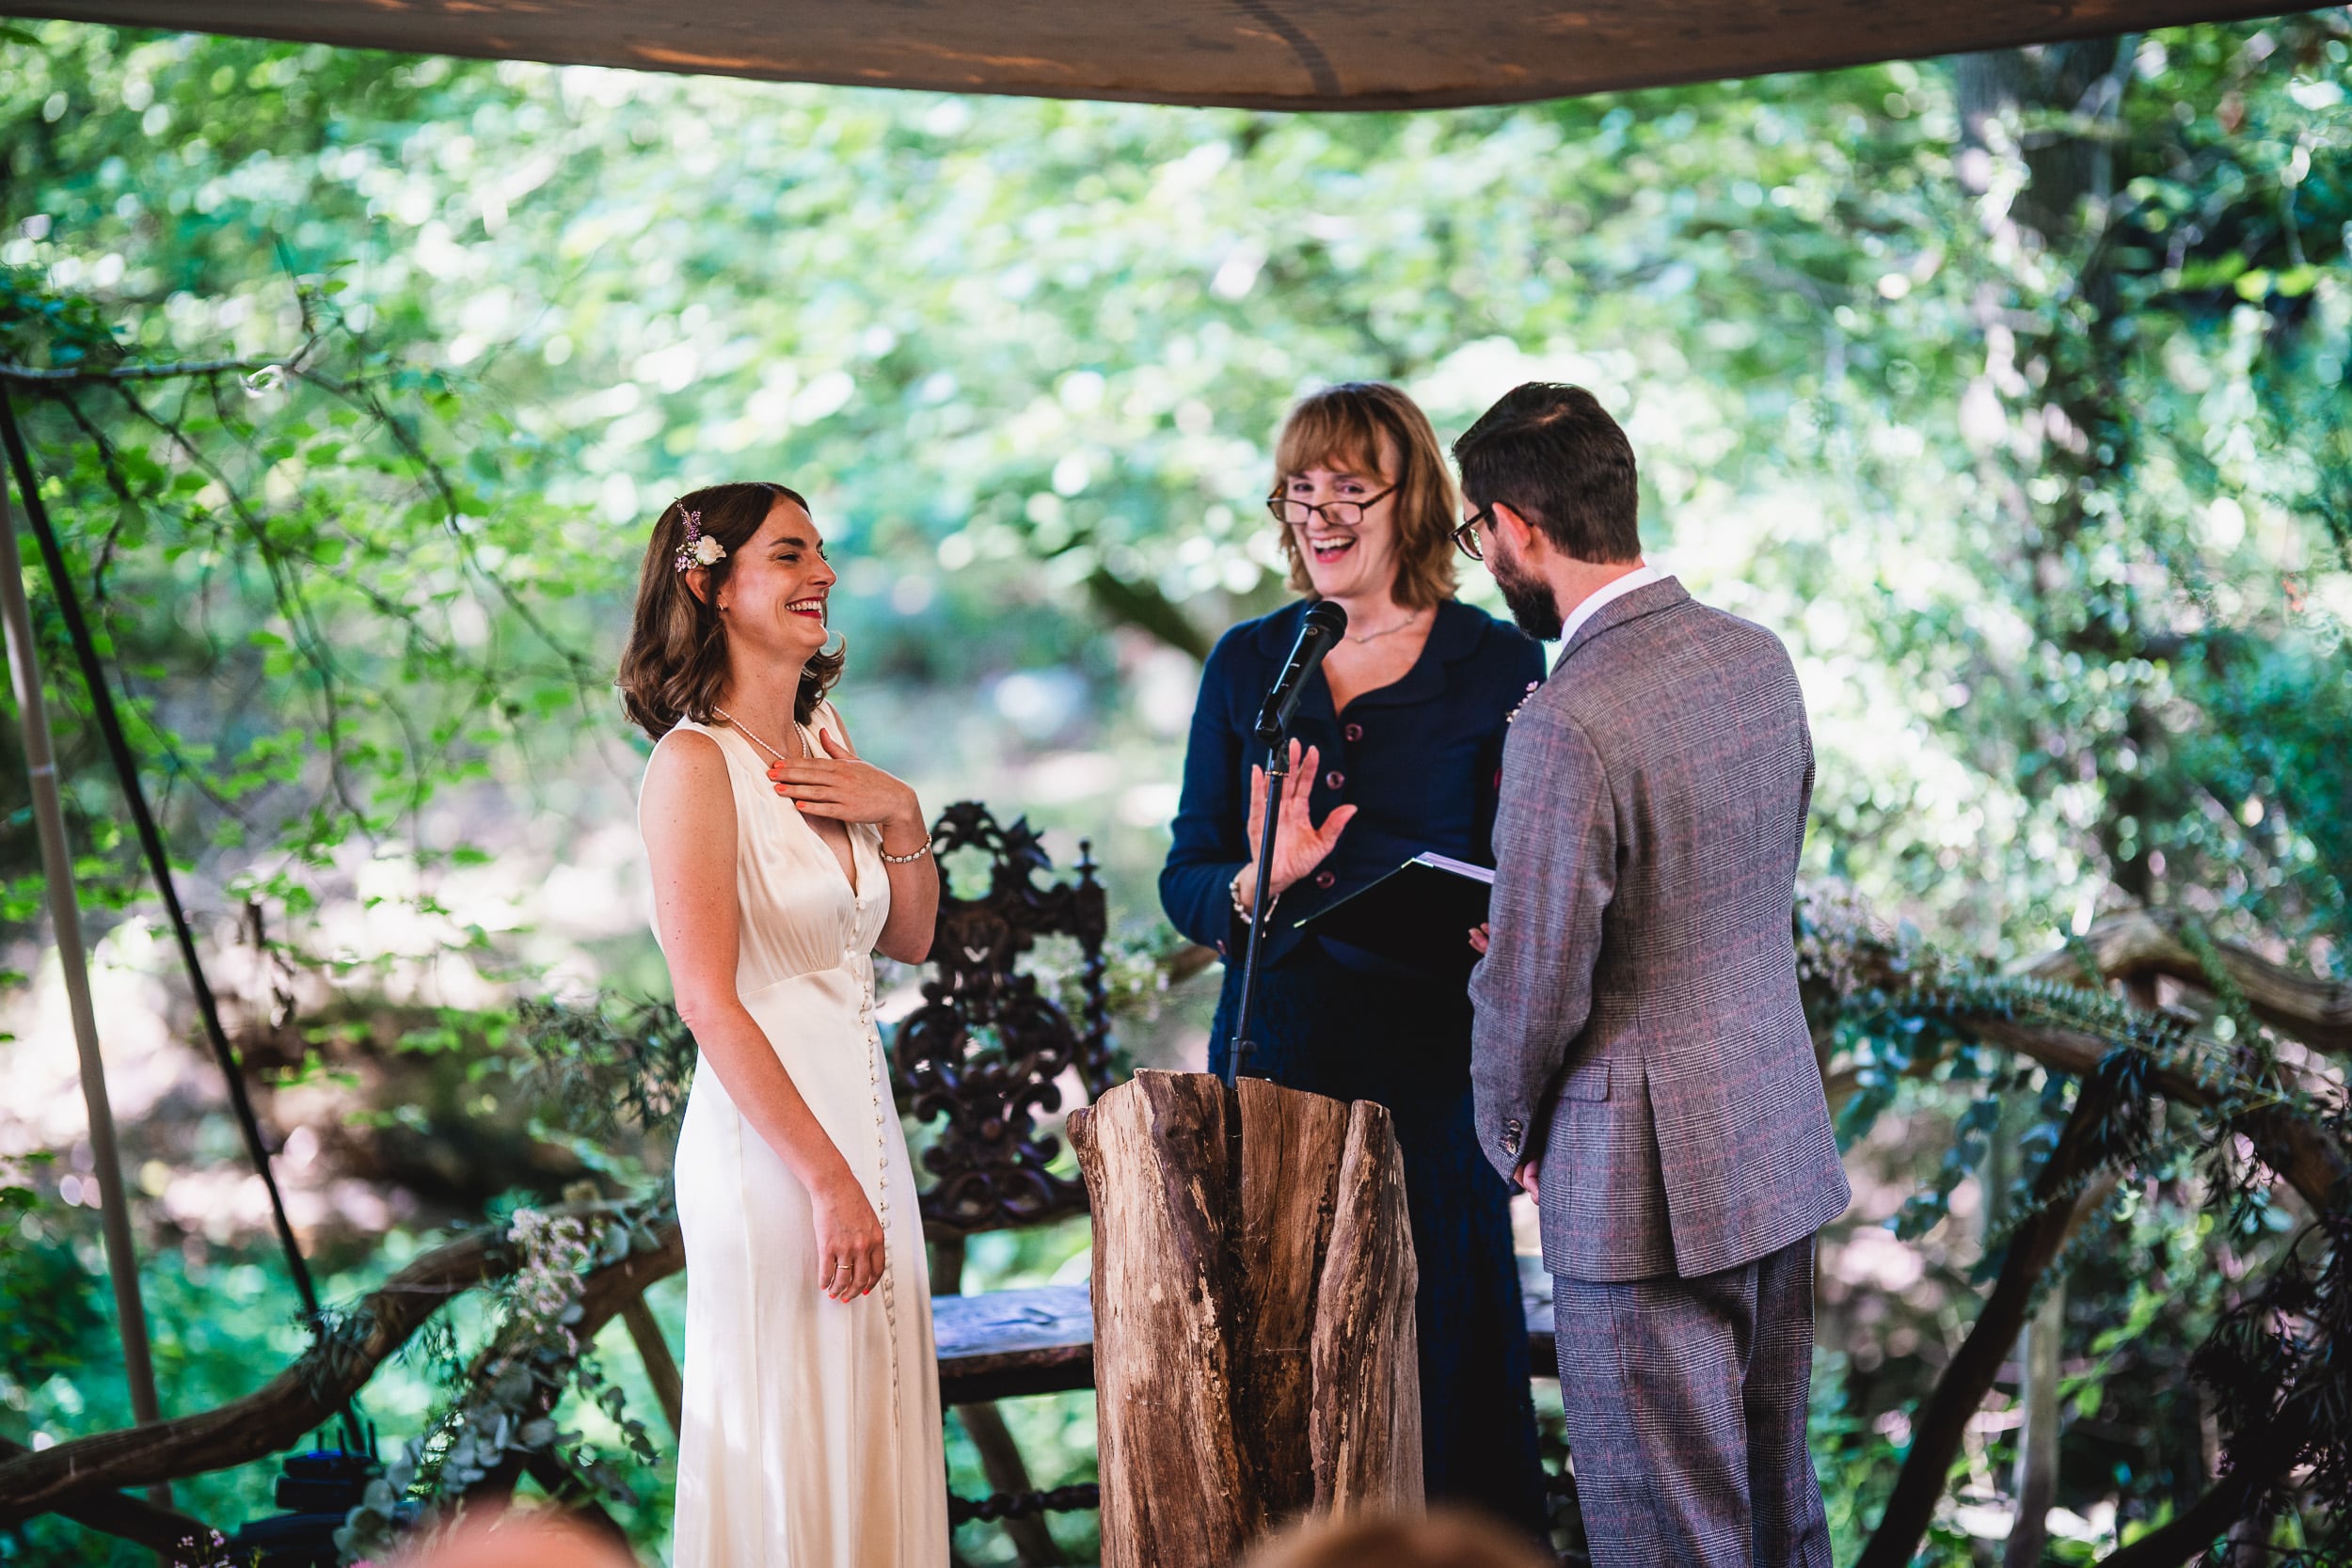 A surreal Surrey wedding takes place as the bride and groom joyfully exchange vows amidst the serene beauty of Ridge Farm's enchanting woods.